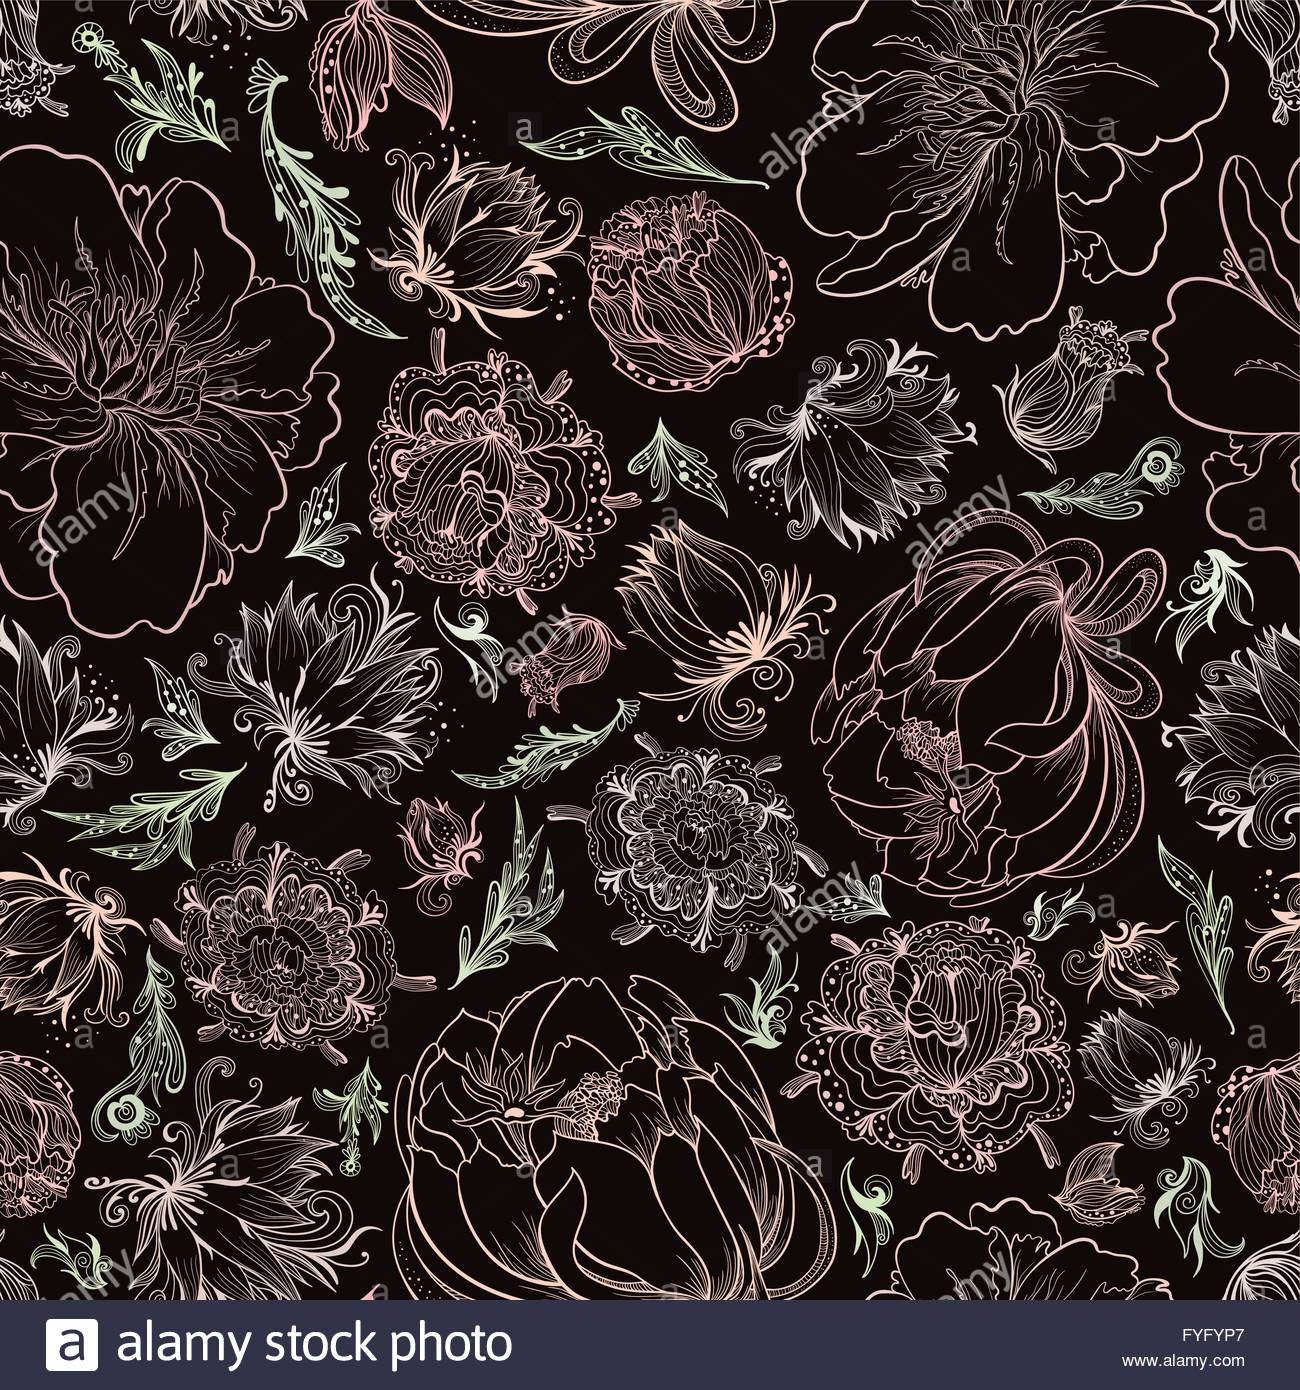 Seamless Floral Texture With Plex Sketch Flowers For Wallpaper